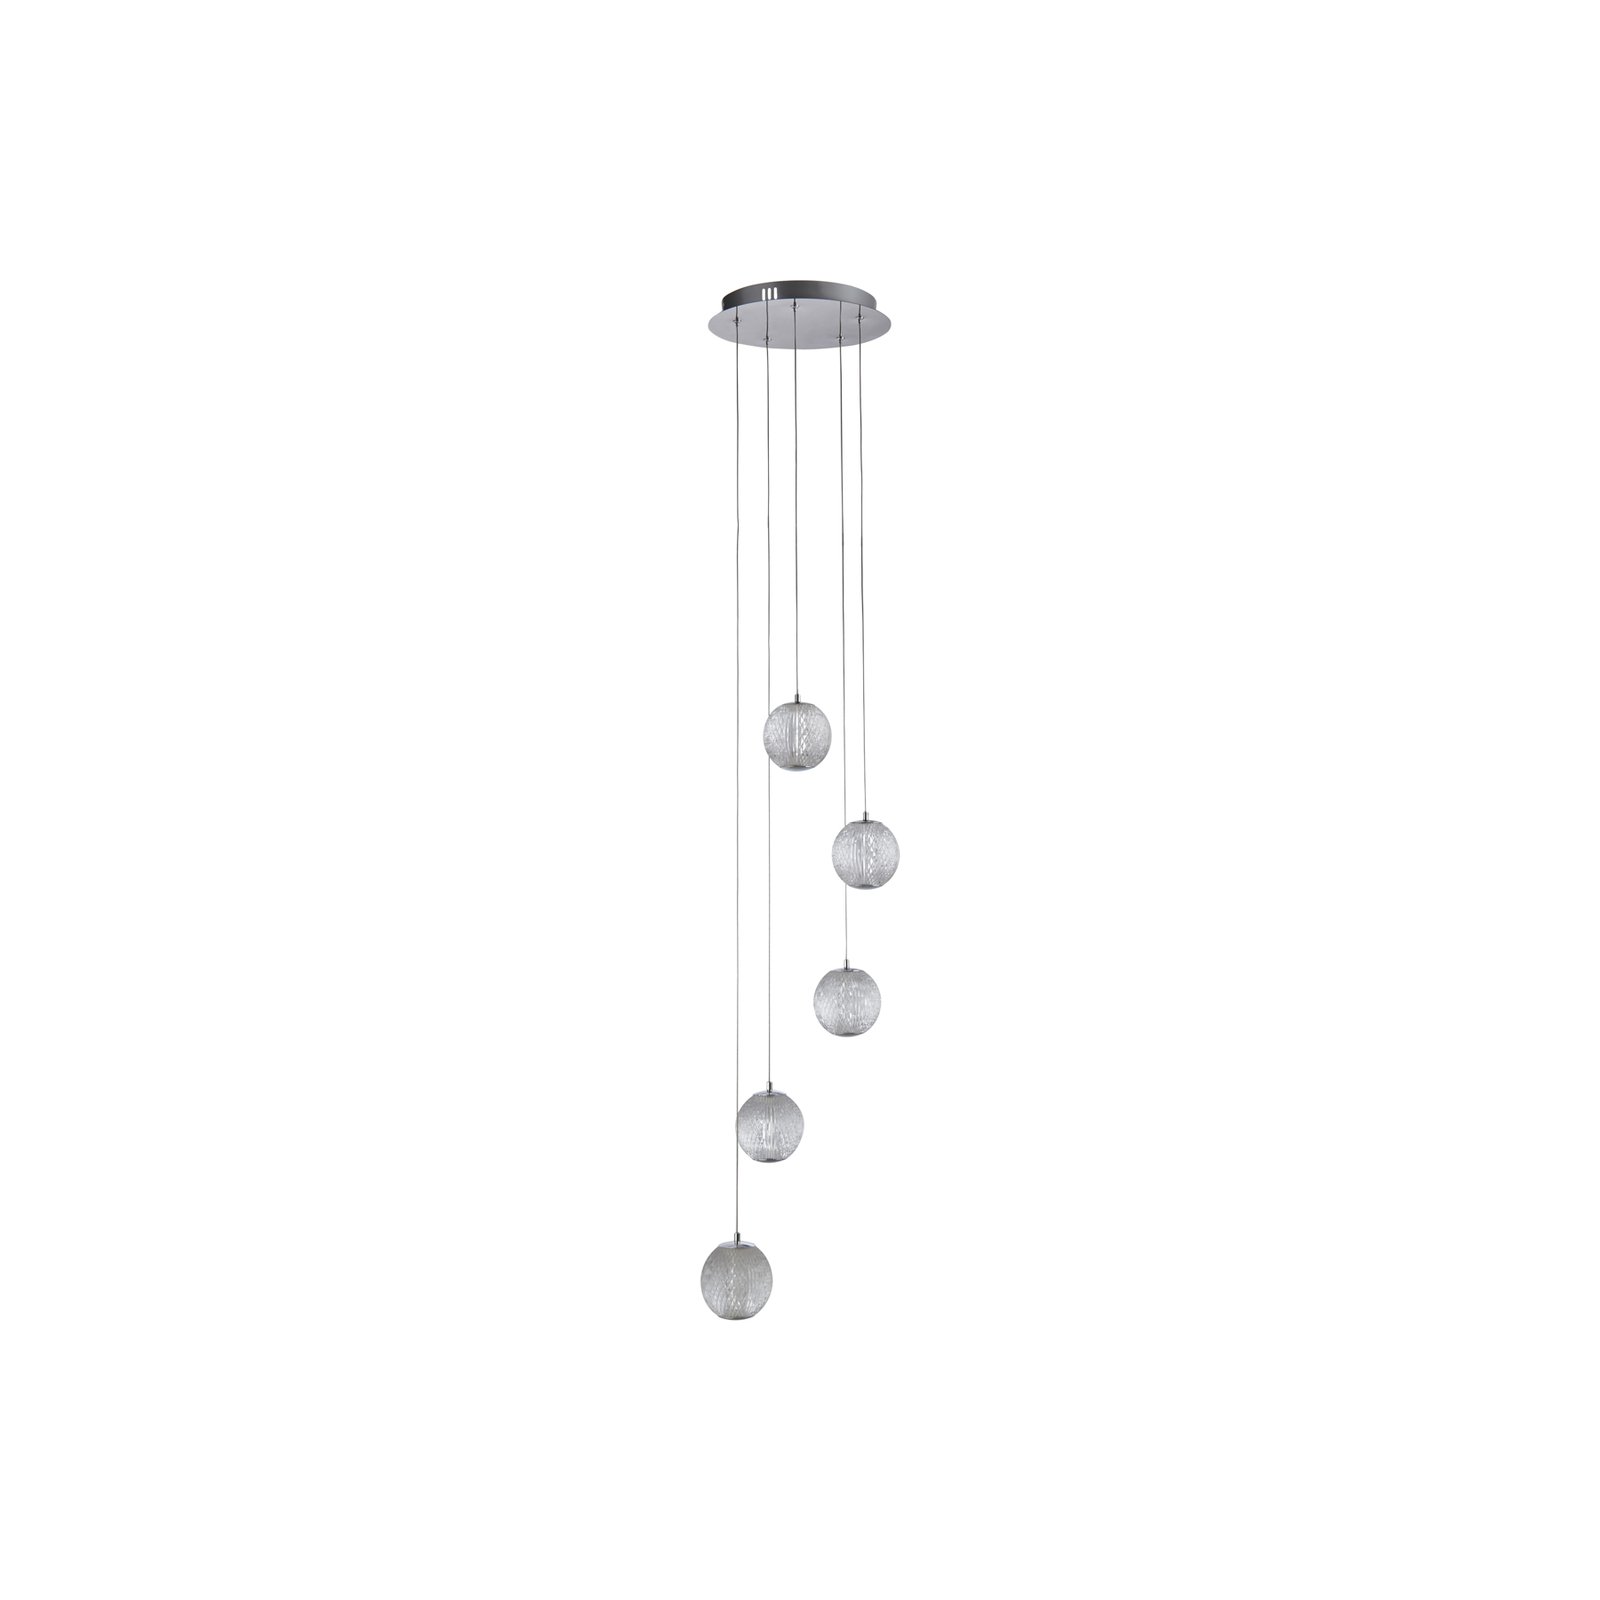 LED hanglamp Allure, rond, 5-lamps